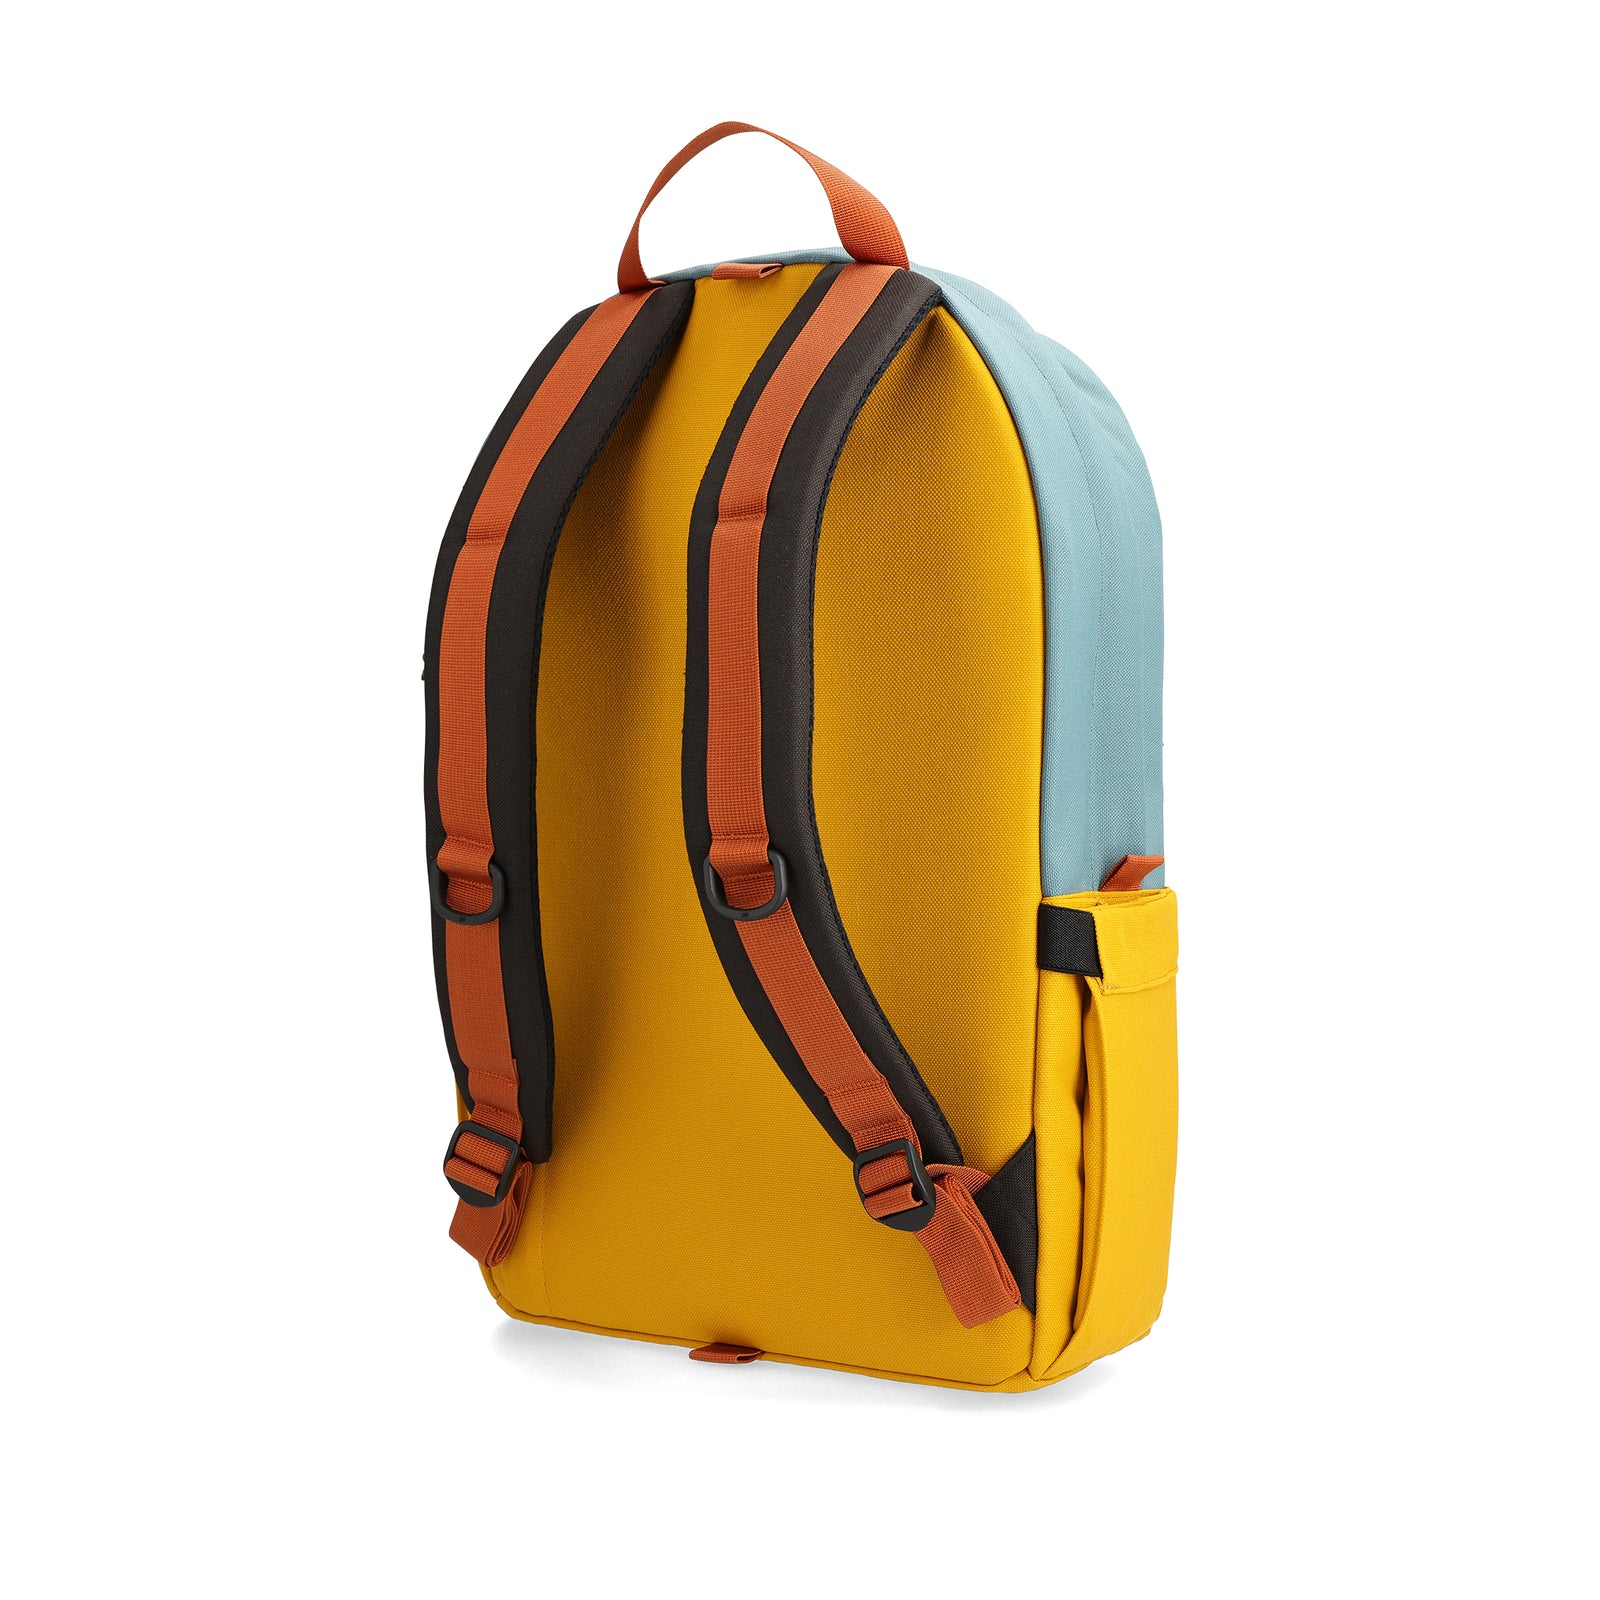 Back View of Topo Designs Daypack Classic in "Navy / Mustard"